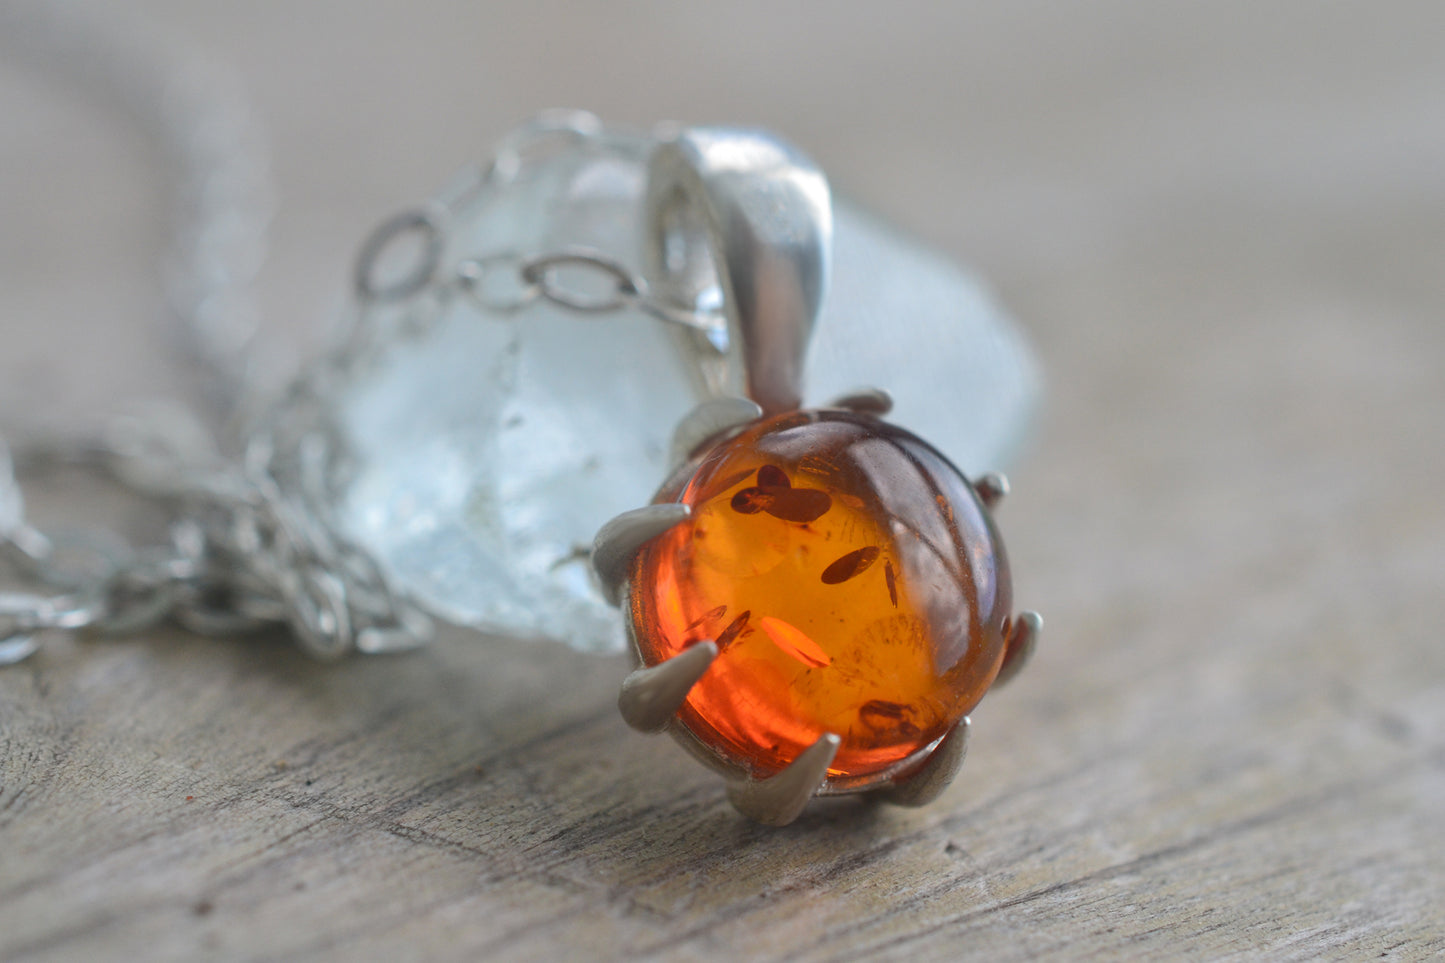 10mm Baltic Amber Pendant in 925 Sterling